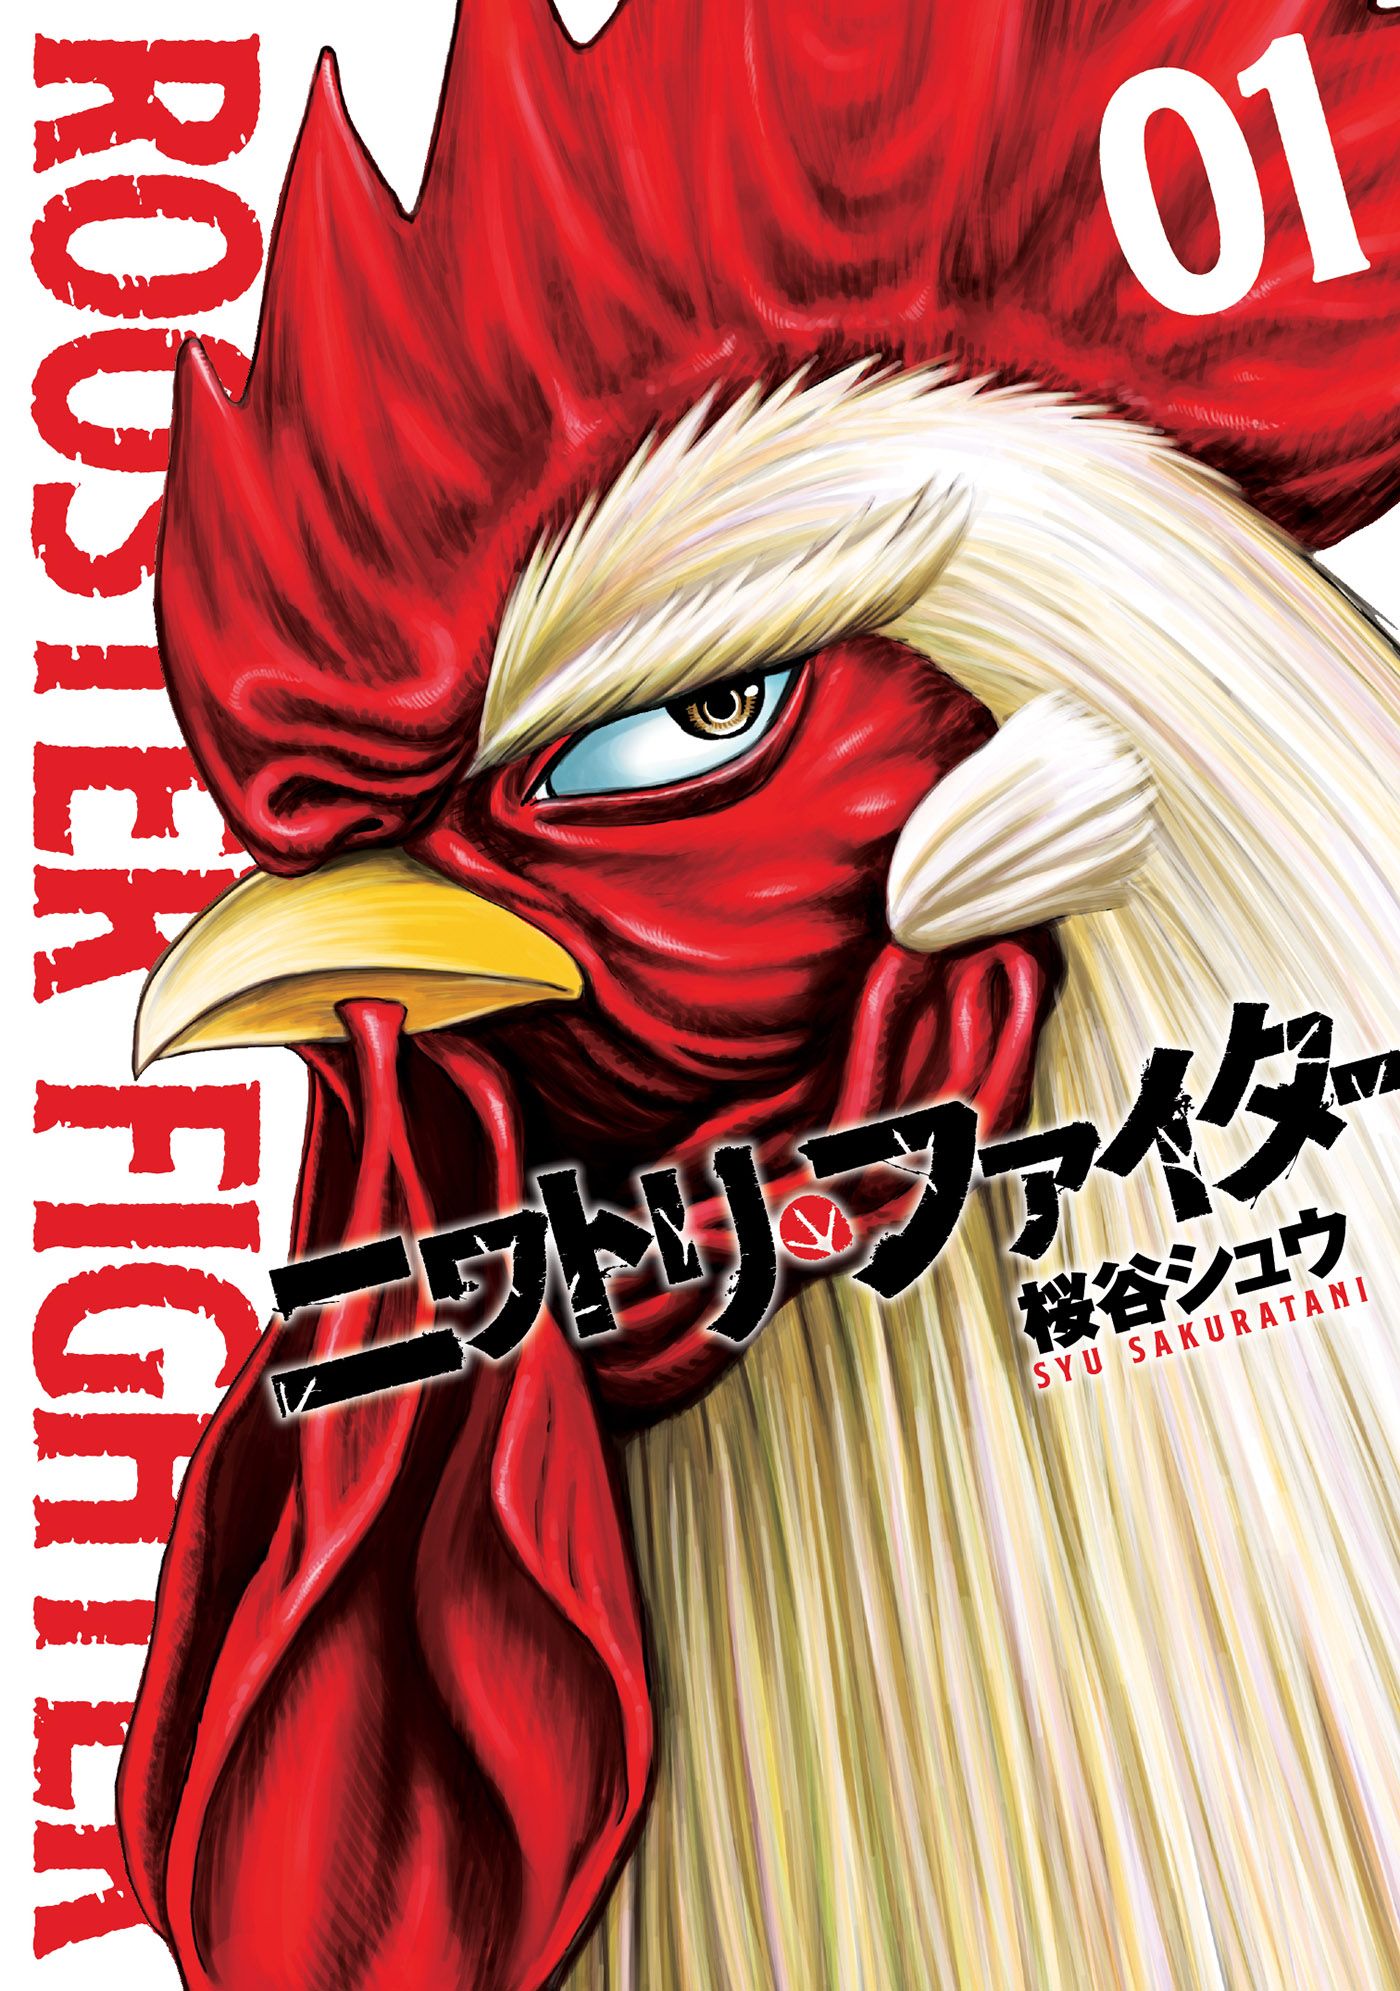 rooster fighter manga volume 1 cover